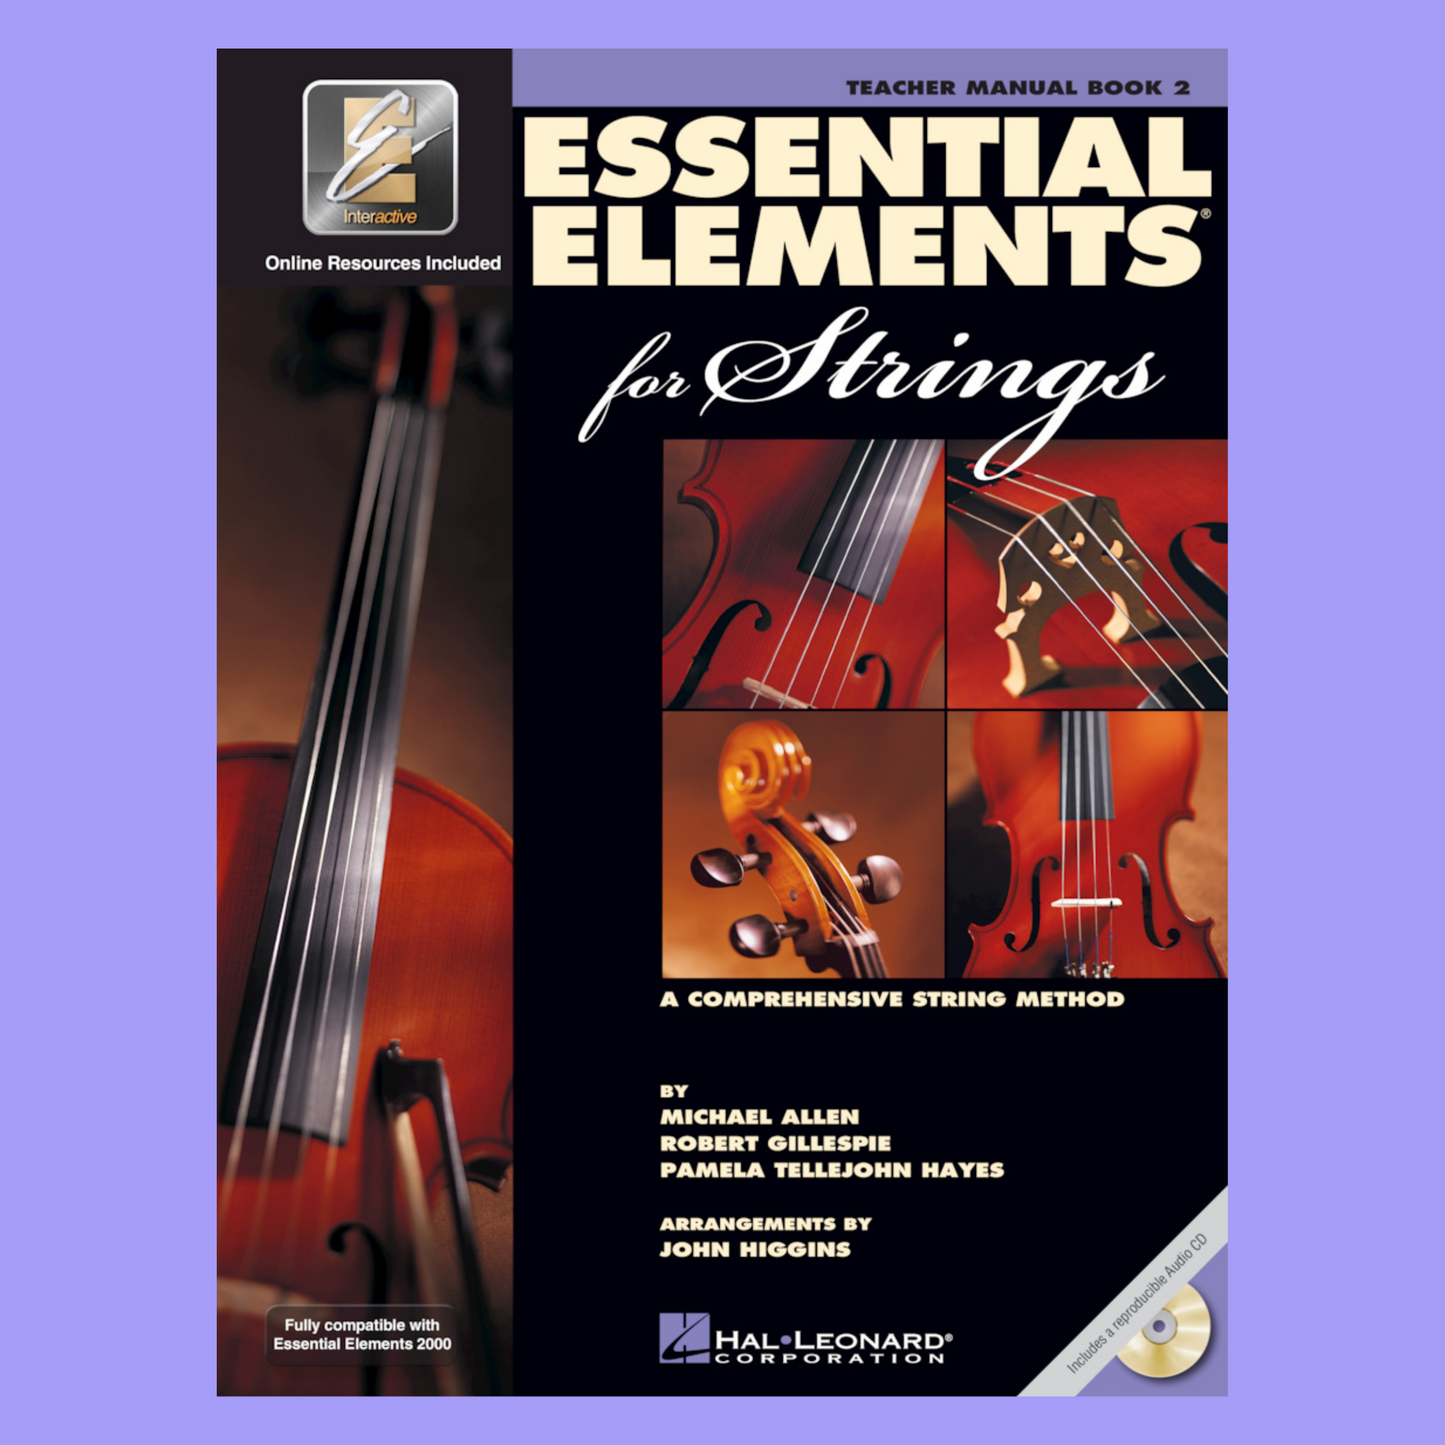 Essential Elements For Strings - Conductor Teacher's Book 2 (EEi Media)